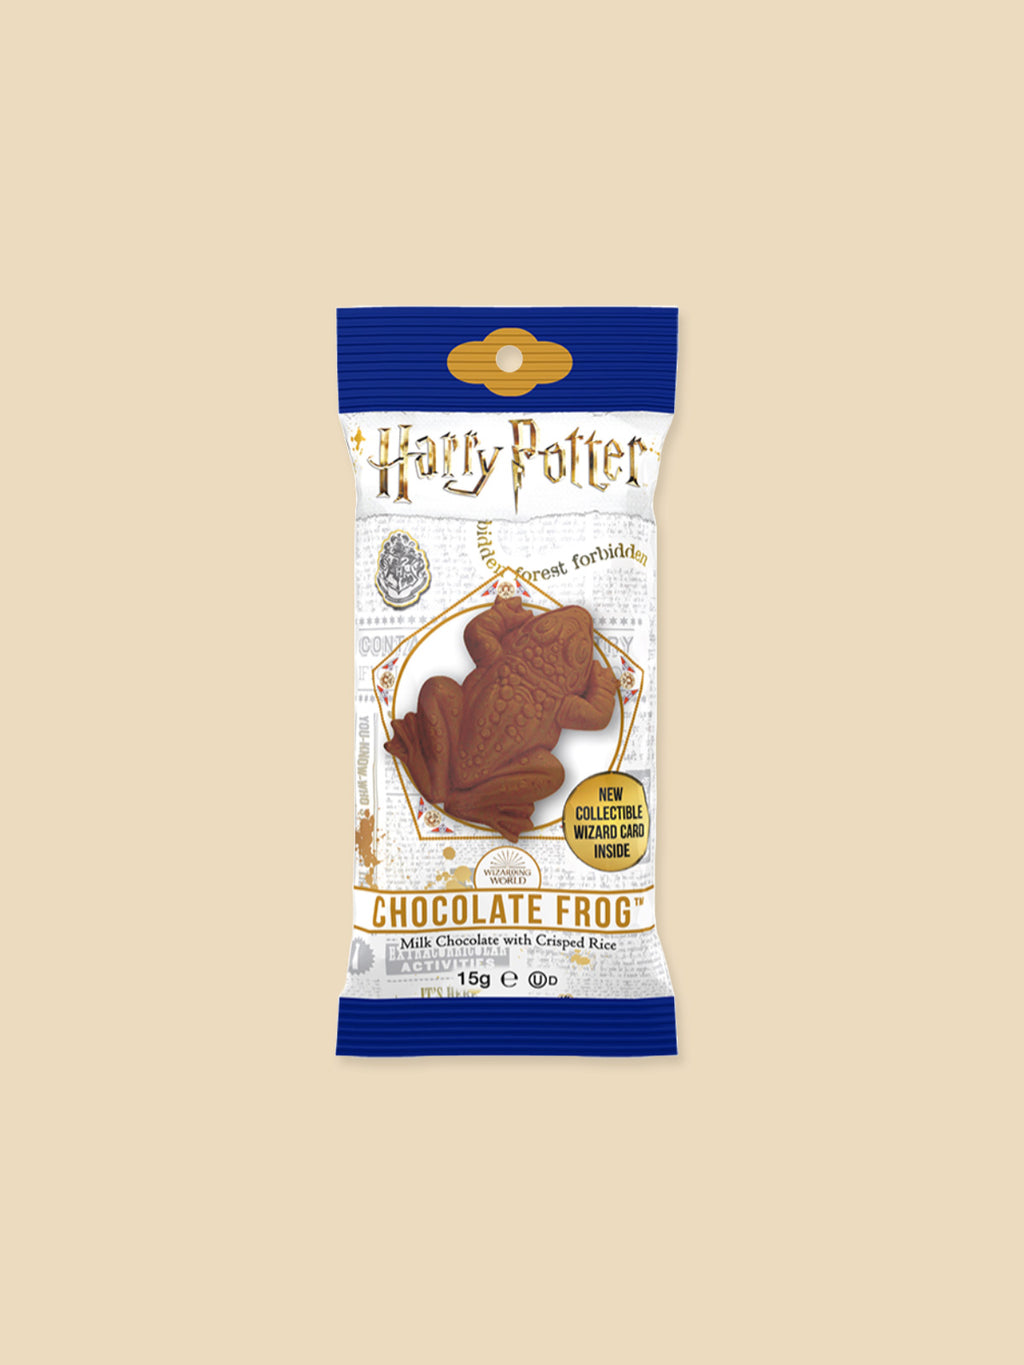 Harry Potter Chocolate Frog with Wizard Card - 15g